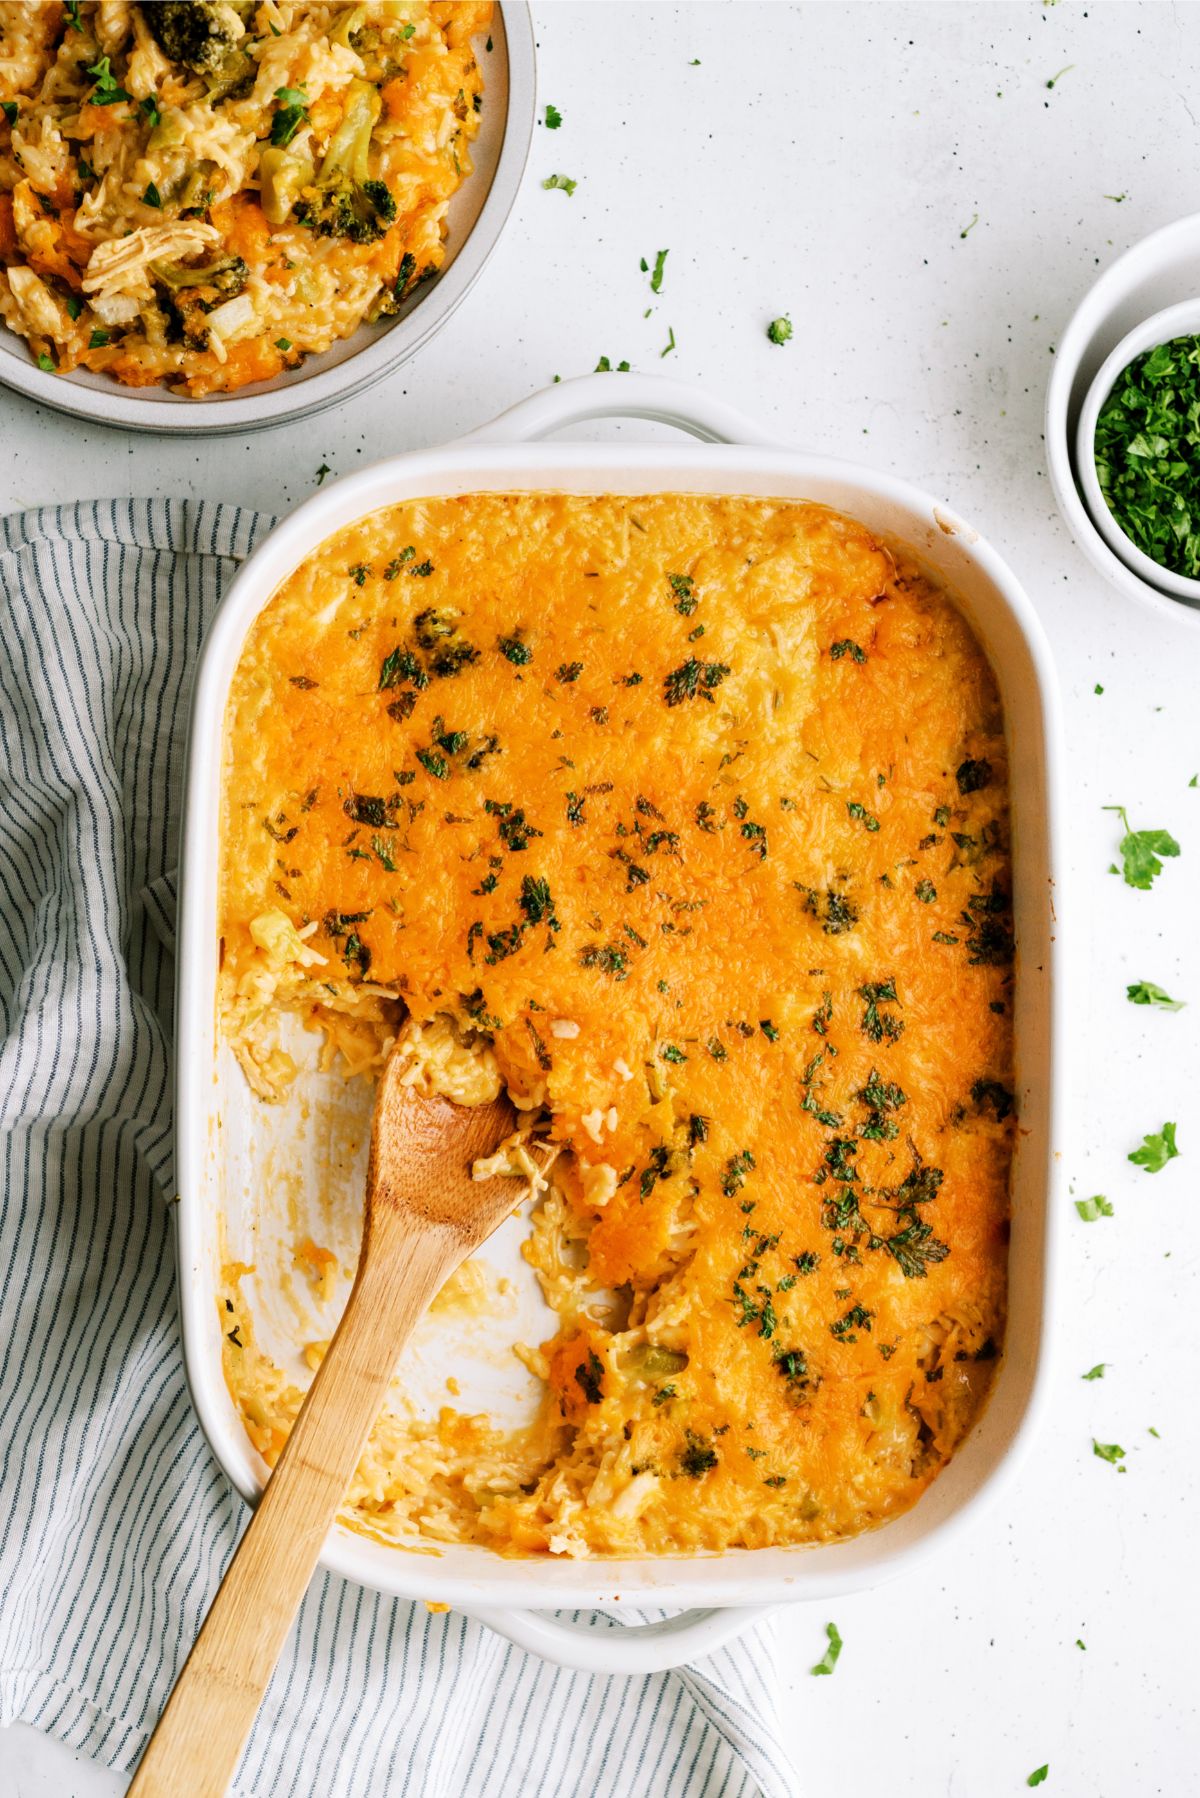 Cheesy Chicken Broccoli Rice Casserole Recipe (No Soup) in casserole dish with a wooden spoon spooning out a serving